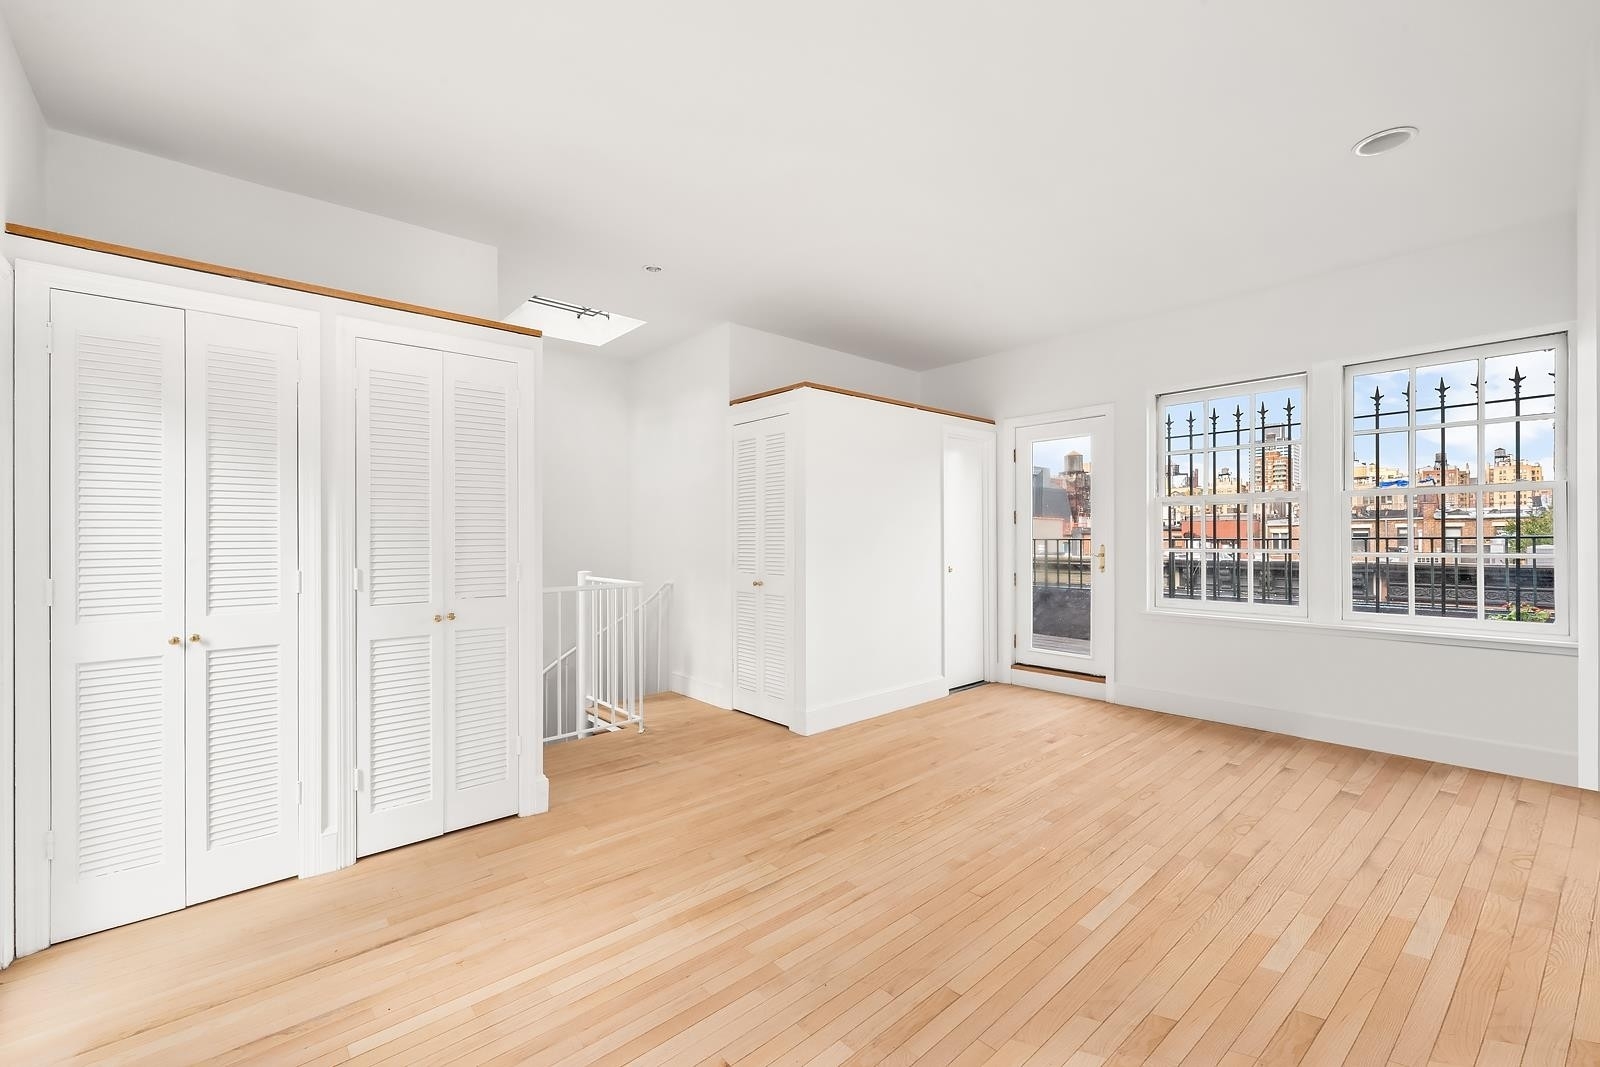 5. Co-op Properties for Sale at 122 W 80TH ST, PH Upper West Side, New York, New York 10024